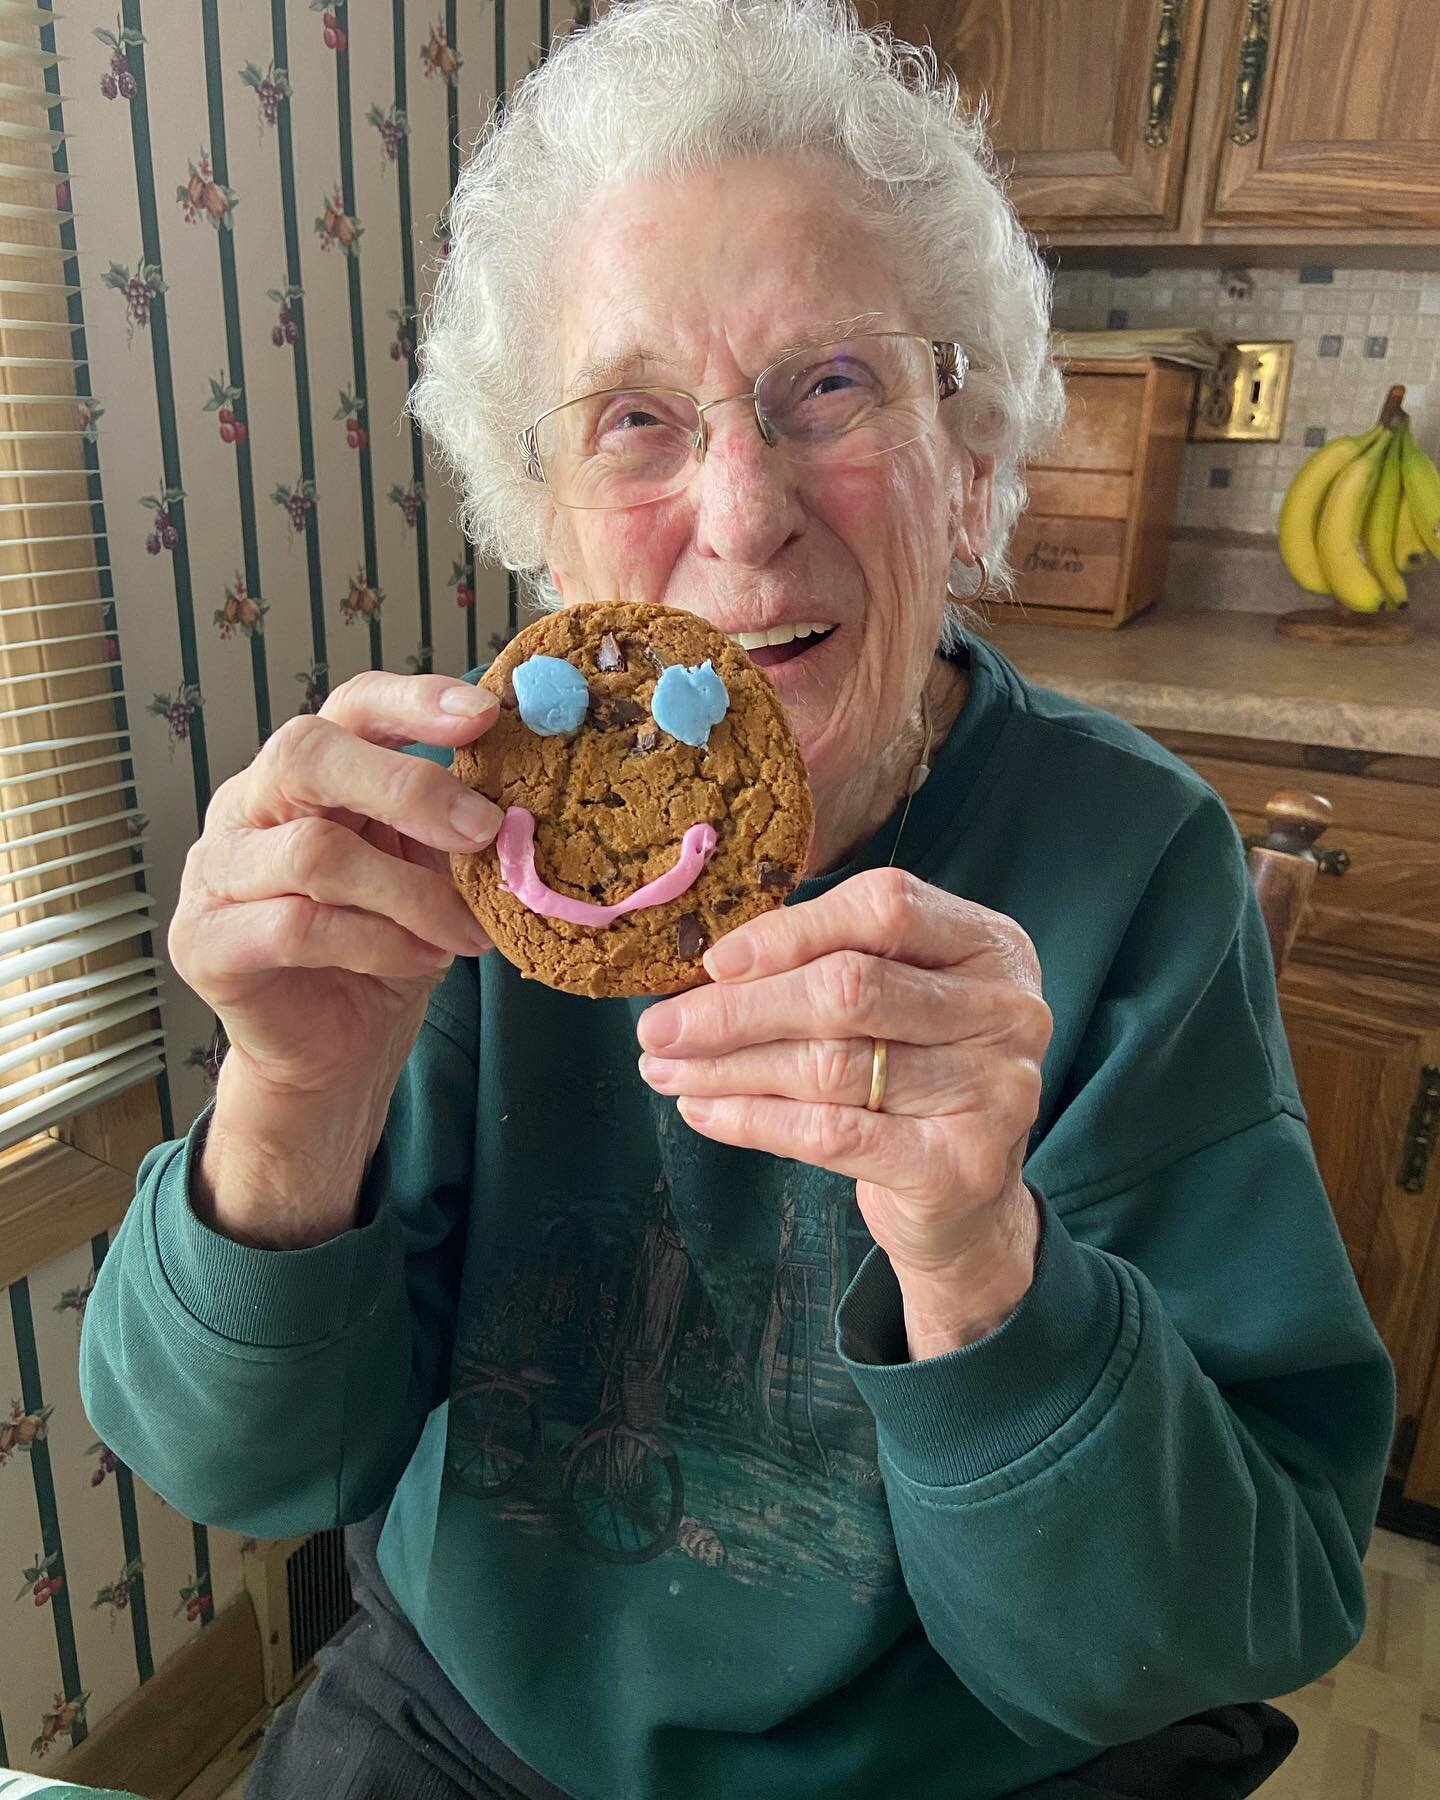 Day 4 of #SmileCookie! 🍪⬇️ 

🍪 2/3 stores in Stratford are leading in sales for our region 
🍪 thousands of cookies are being cooked, decorated + sold each day by the Tim&rsquo;s staff and our dedicated board, staff + volunteers! 

*you can still p